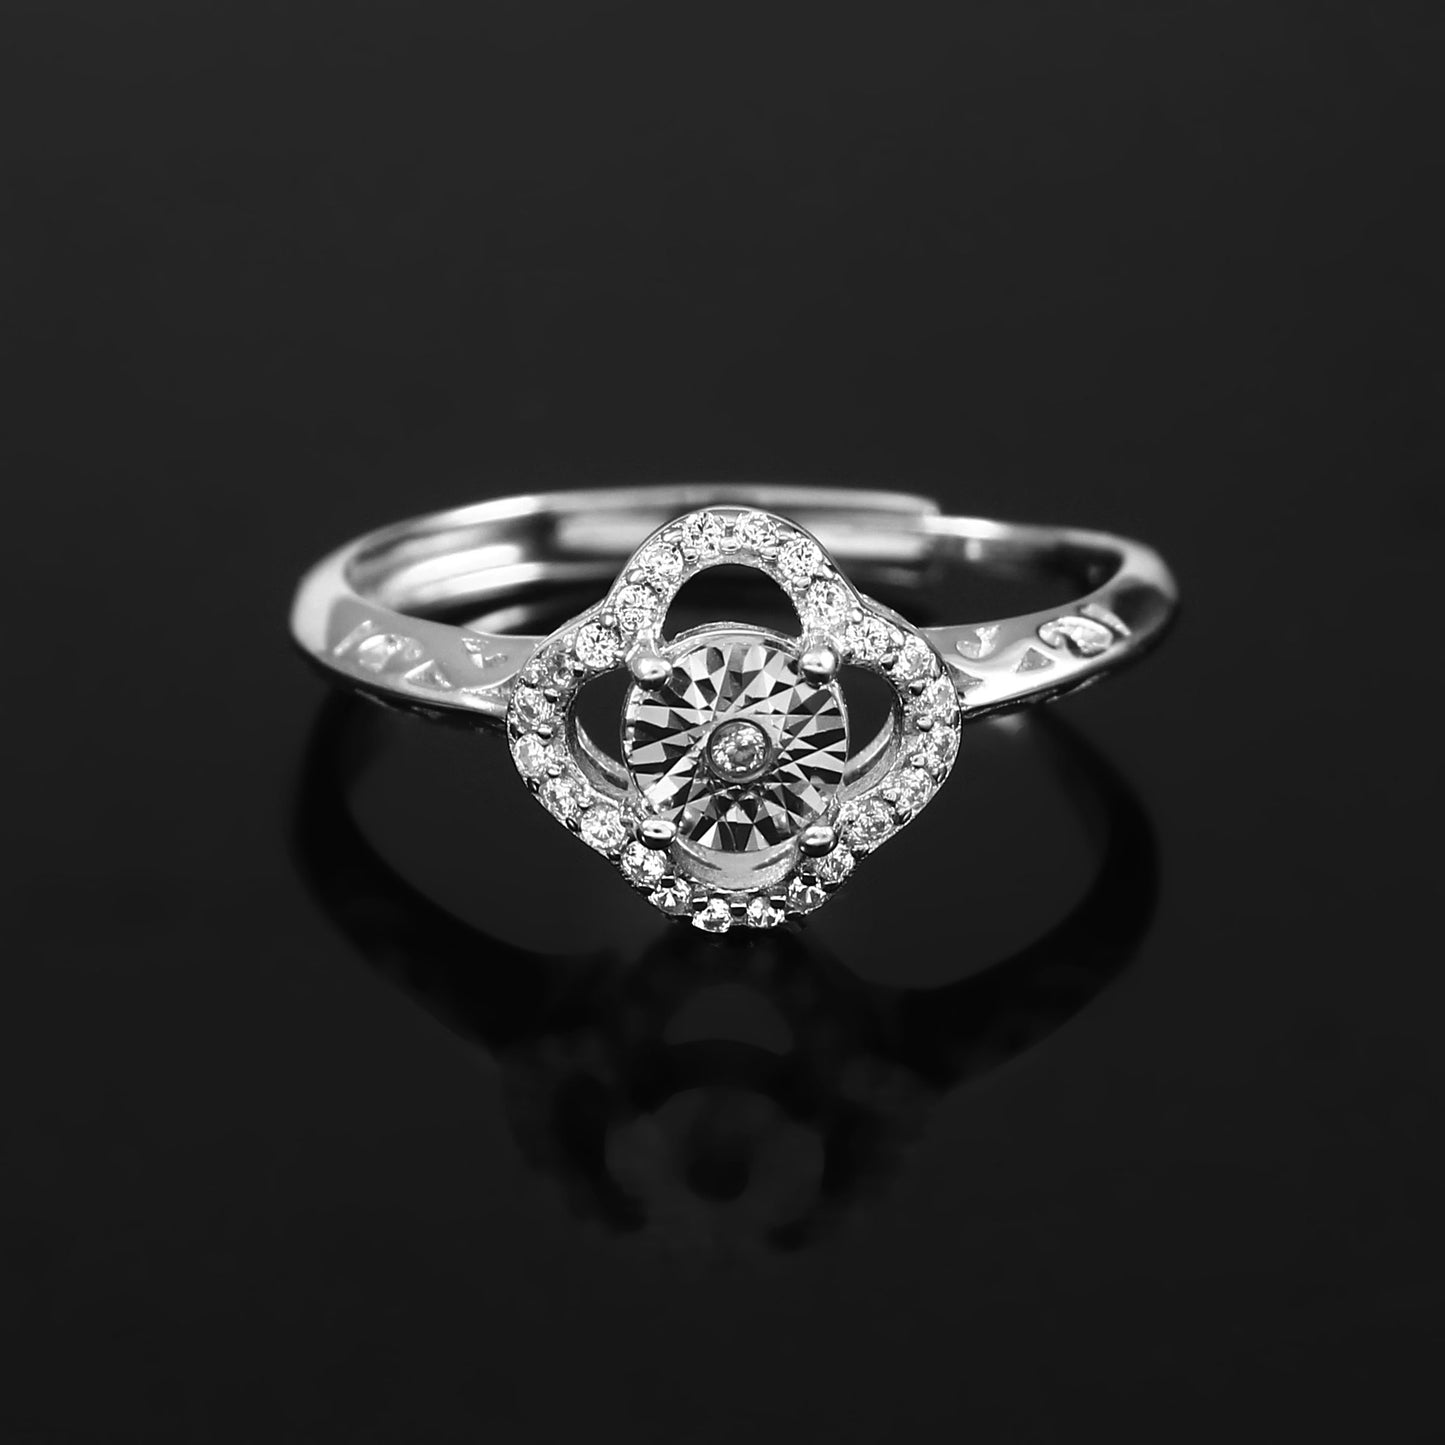 Net Design Solitaire Ring 925 Sterling Silver